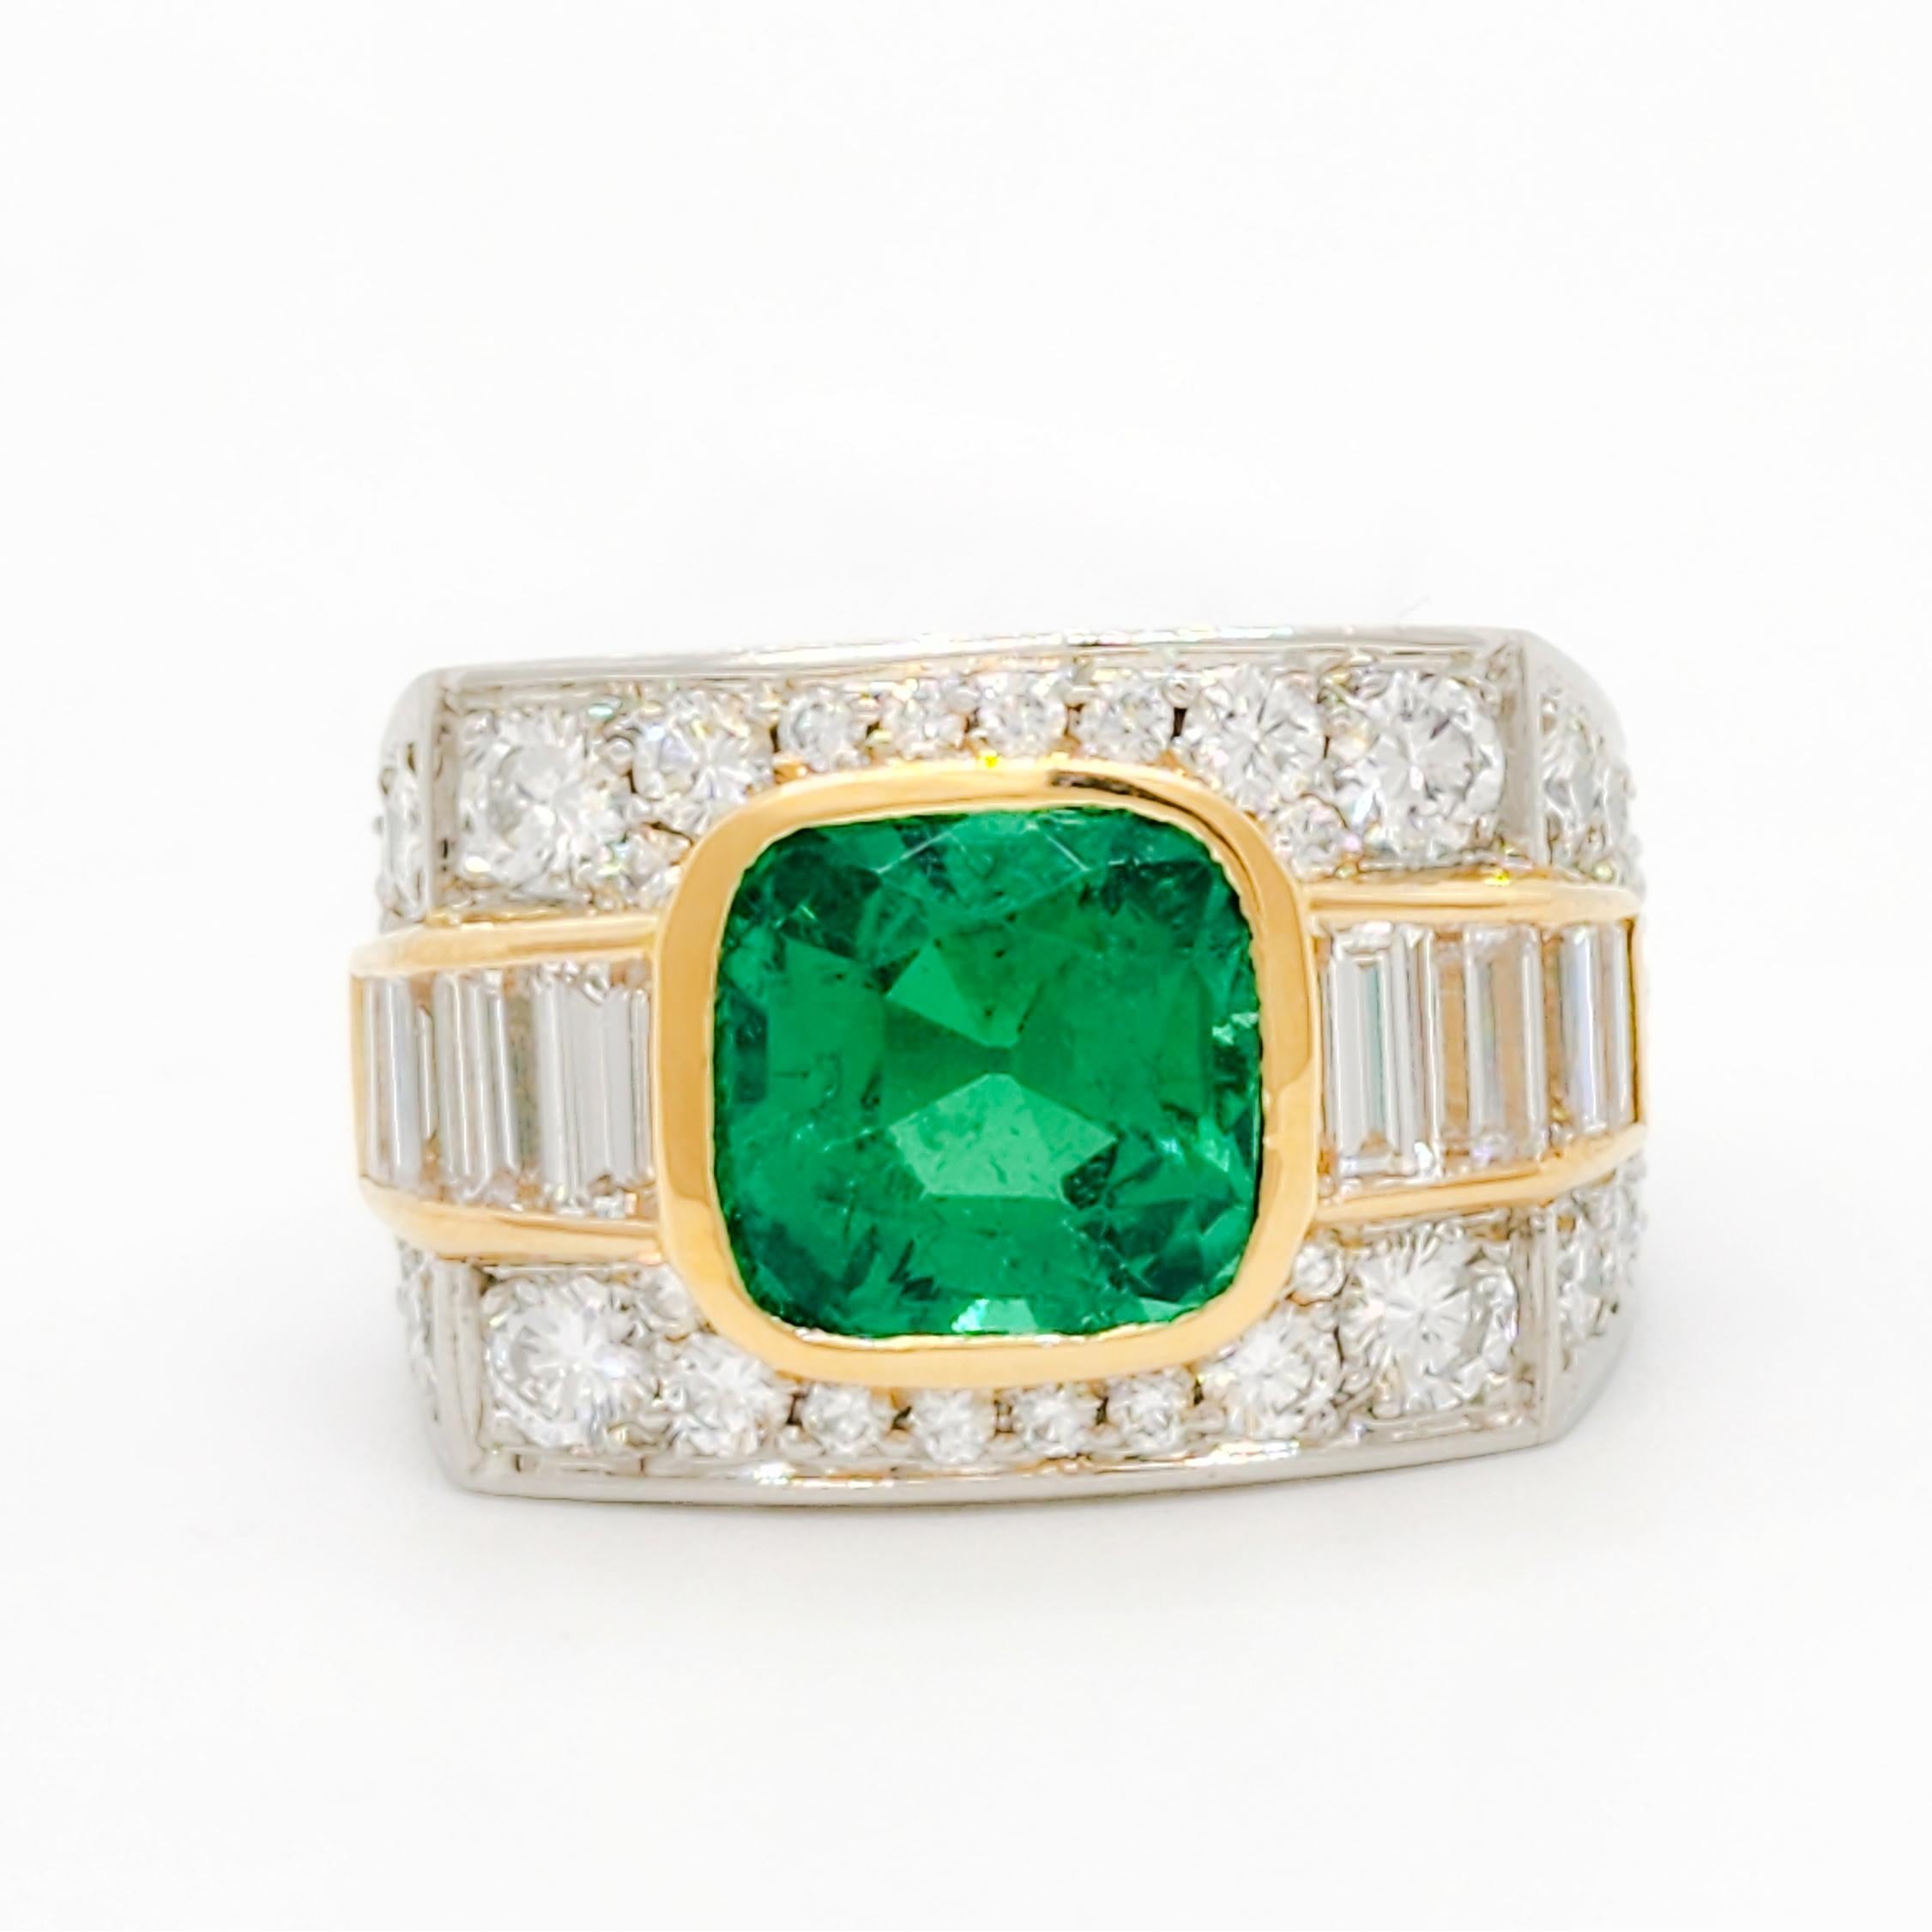 Gorgeous 3.04 ct. Colombian emerald square cushion with good quality white diamond baguettes and rounds.  Handmade in 18k yellow gold and platinum.  This ring is stunning in person.  AGL certificate included.  Ring size 6.